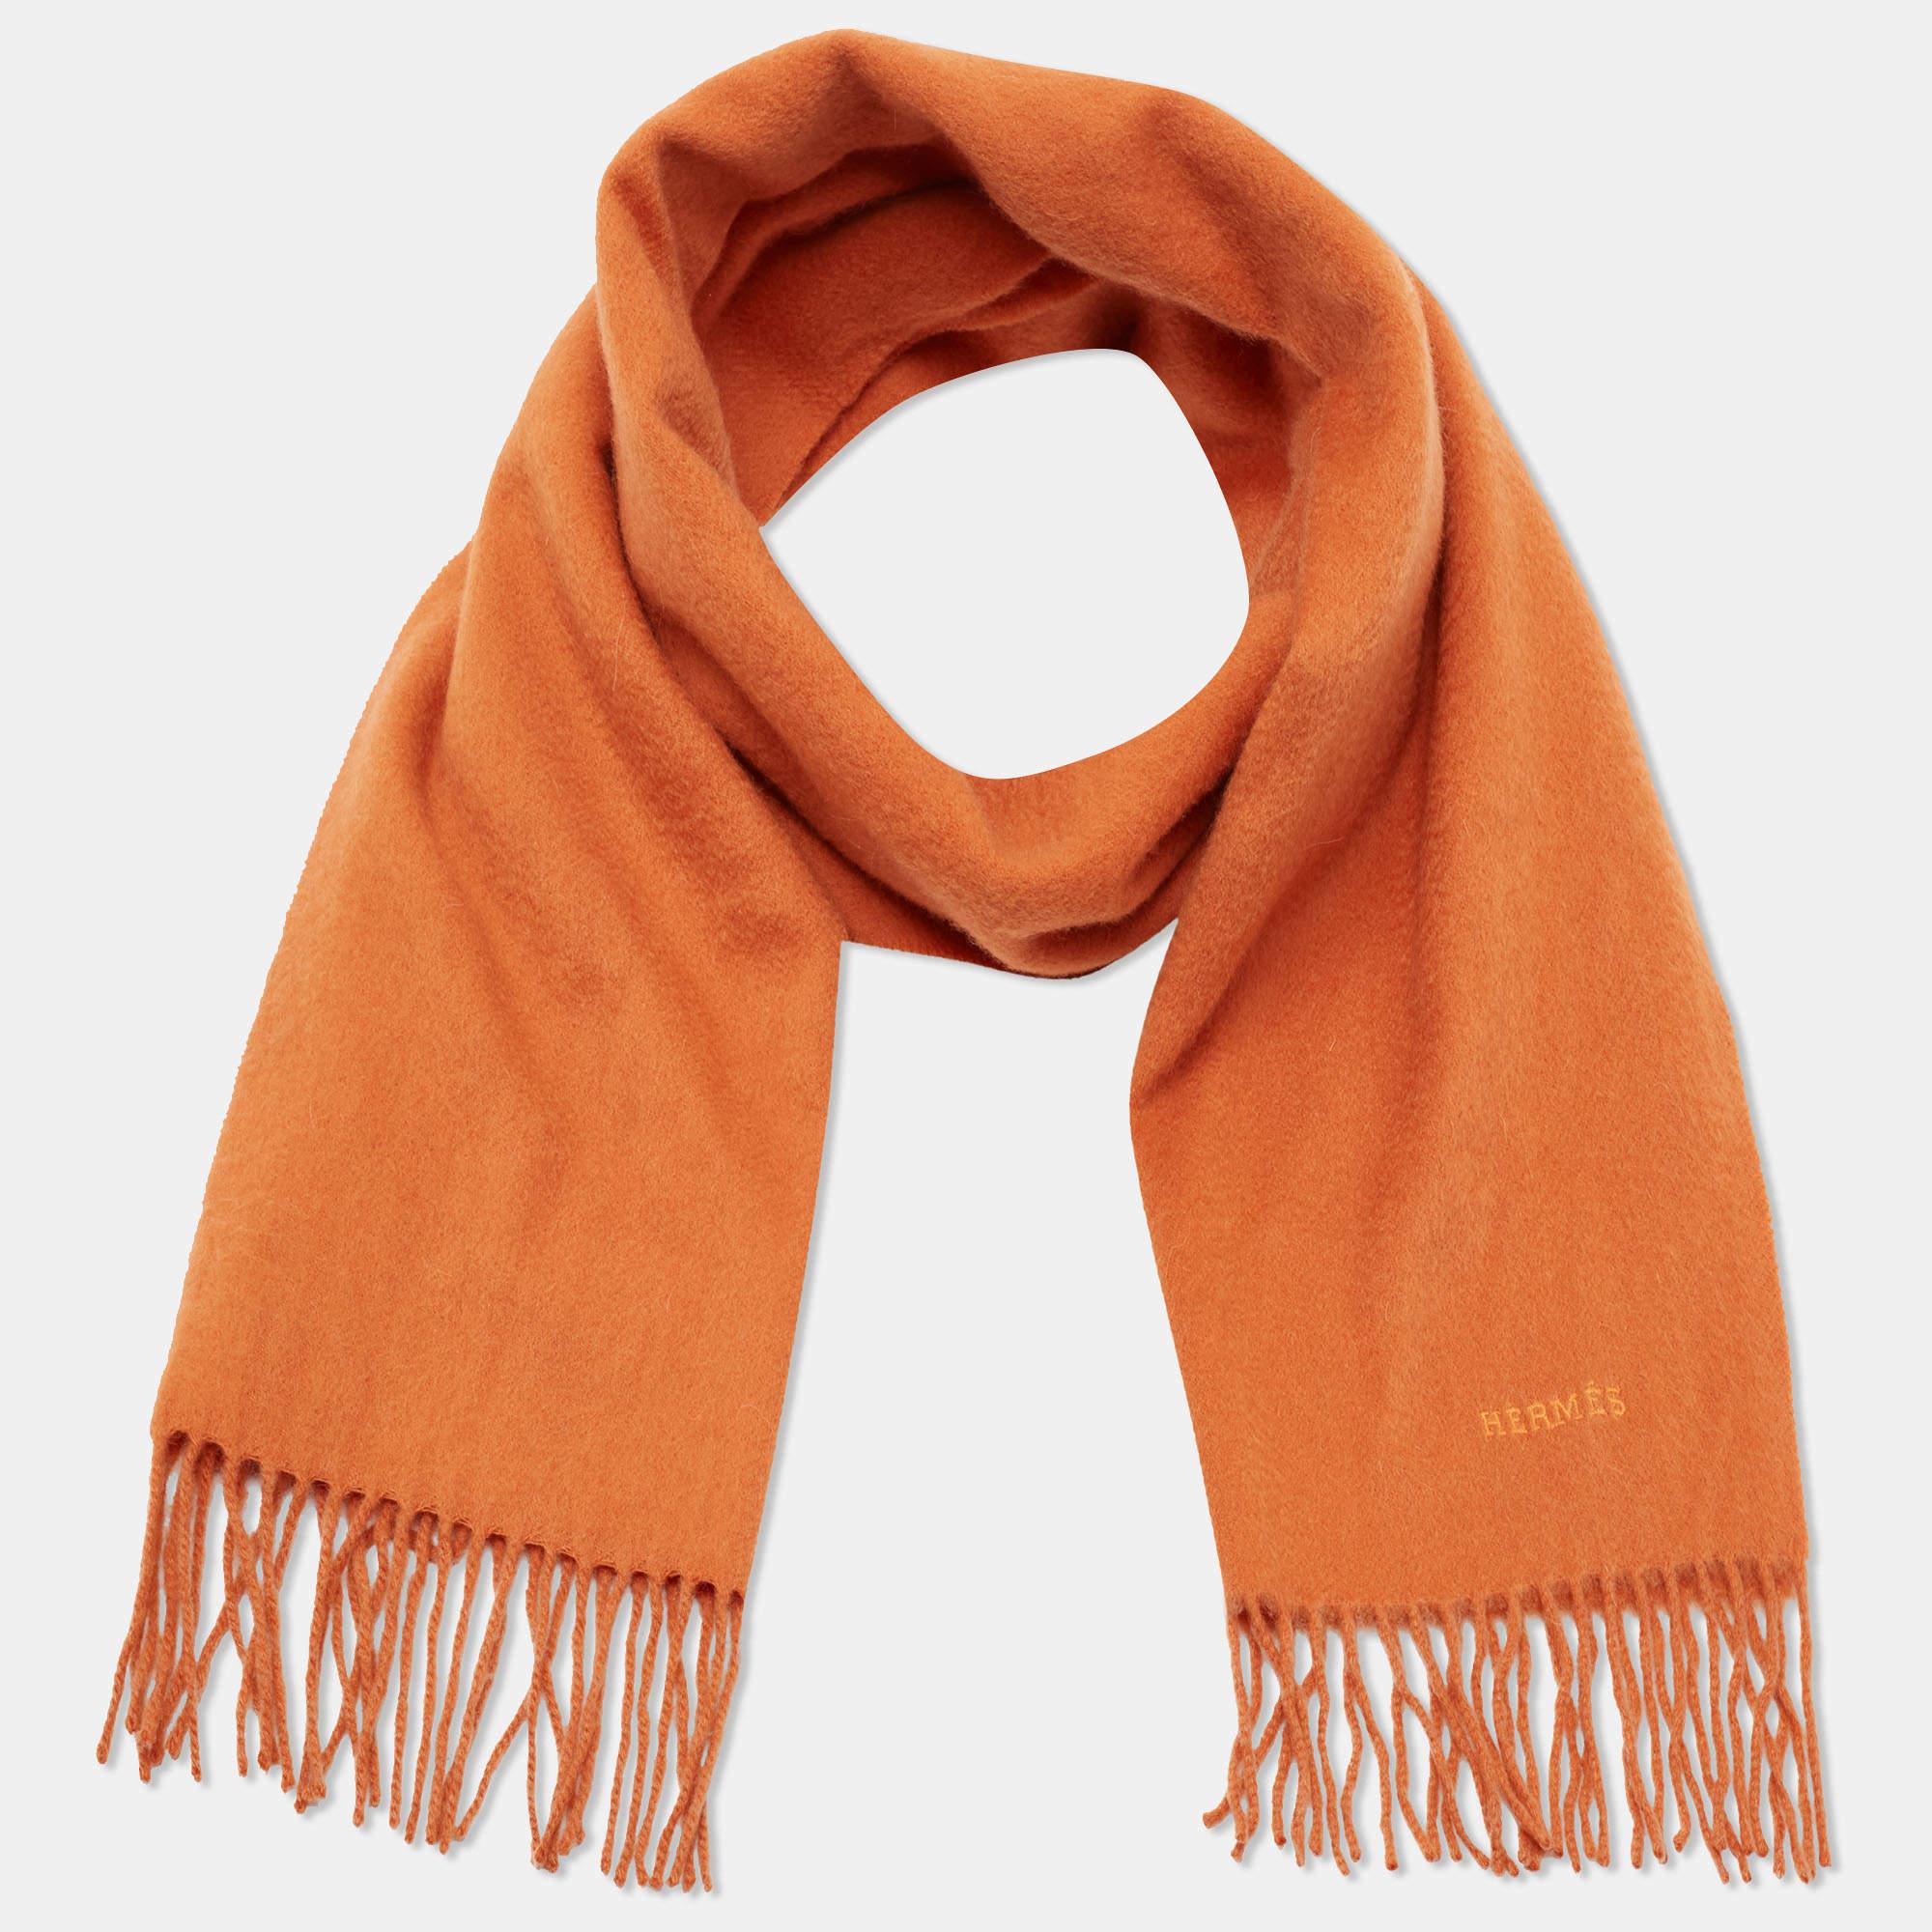 Grand in orange, this Hermes stole aims to be a fashionable style companion for winter. It is made of luxurious cashmere and sized to complement an evening dress or a day outfit.

